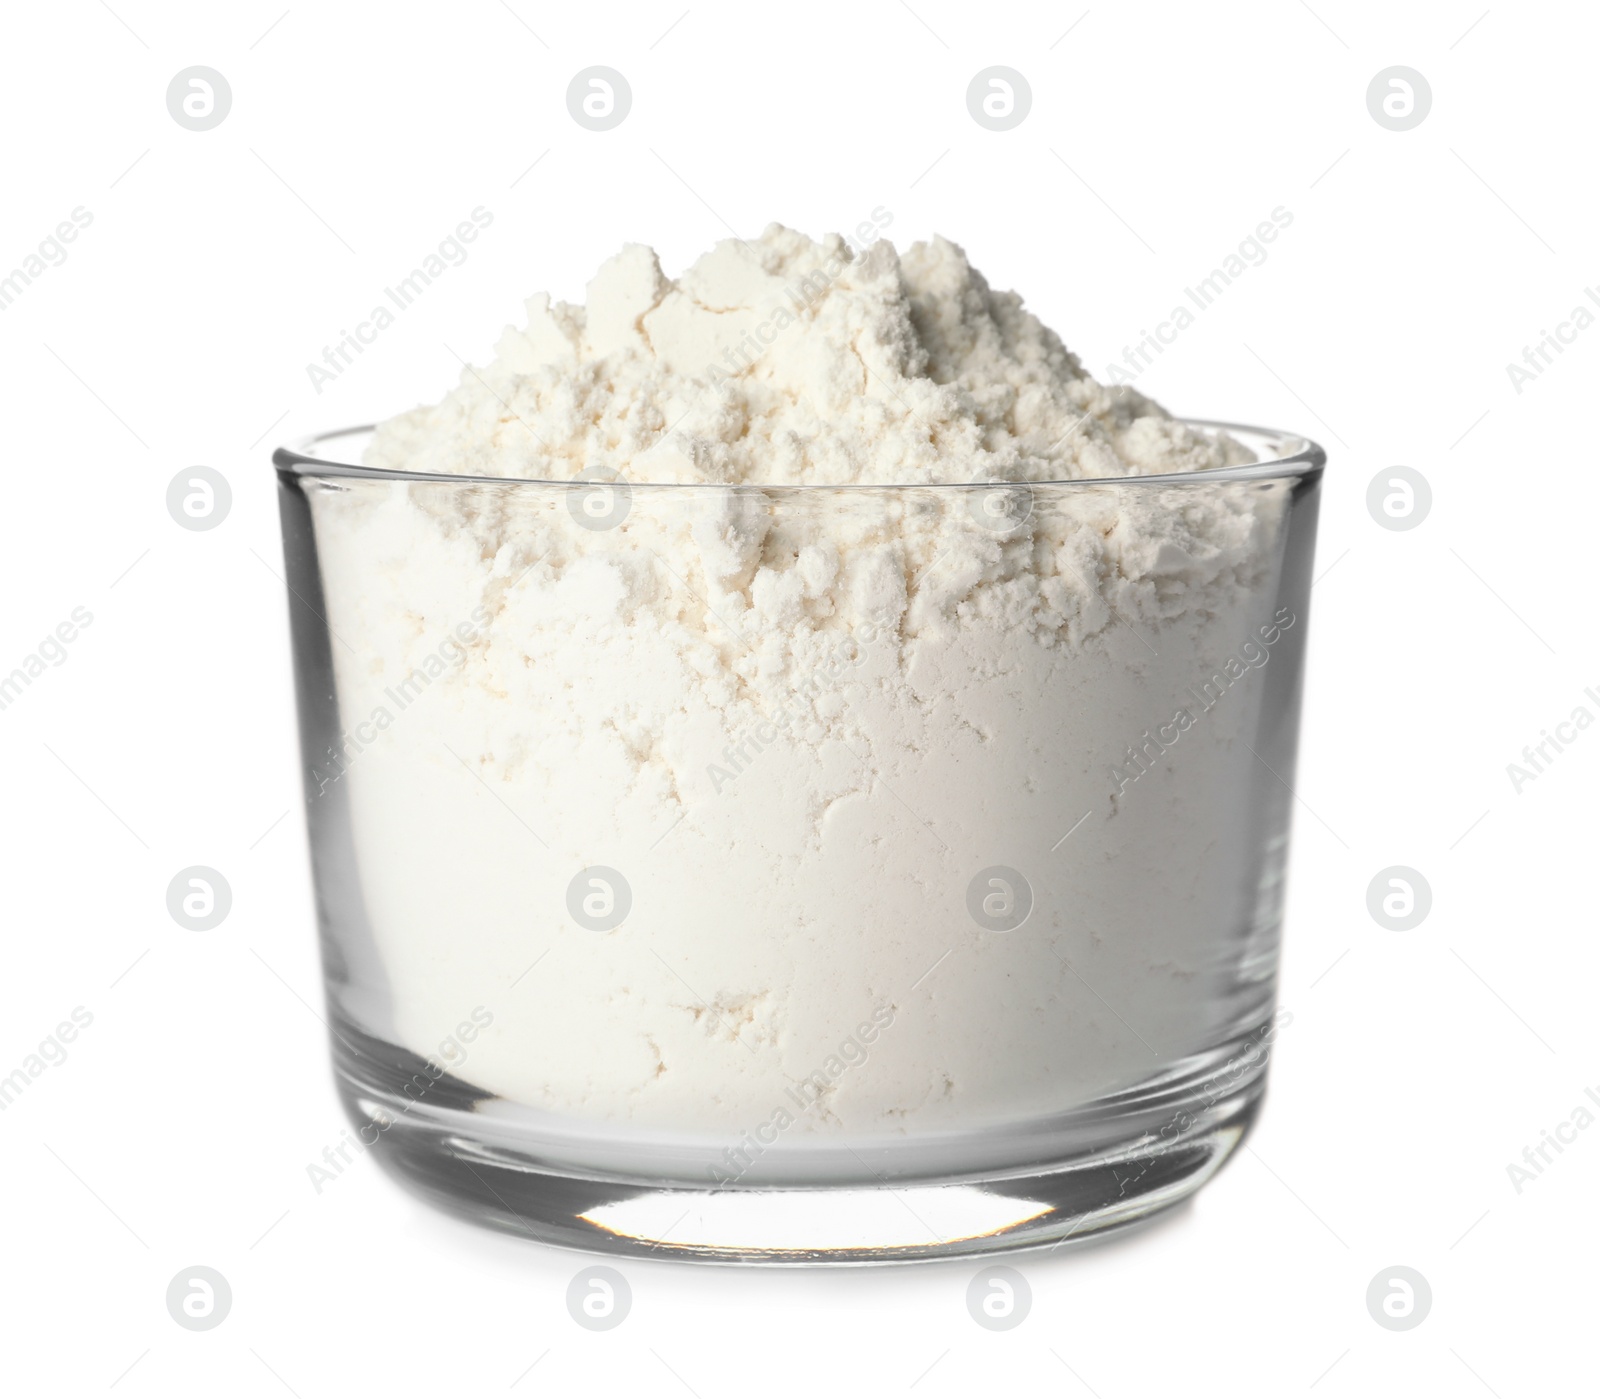 Photo of Bowl of flour isolated on white